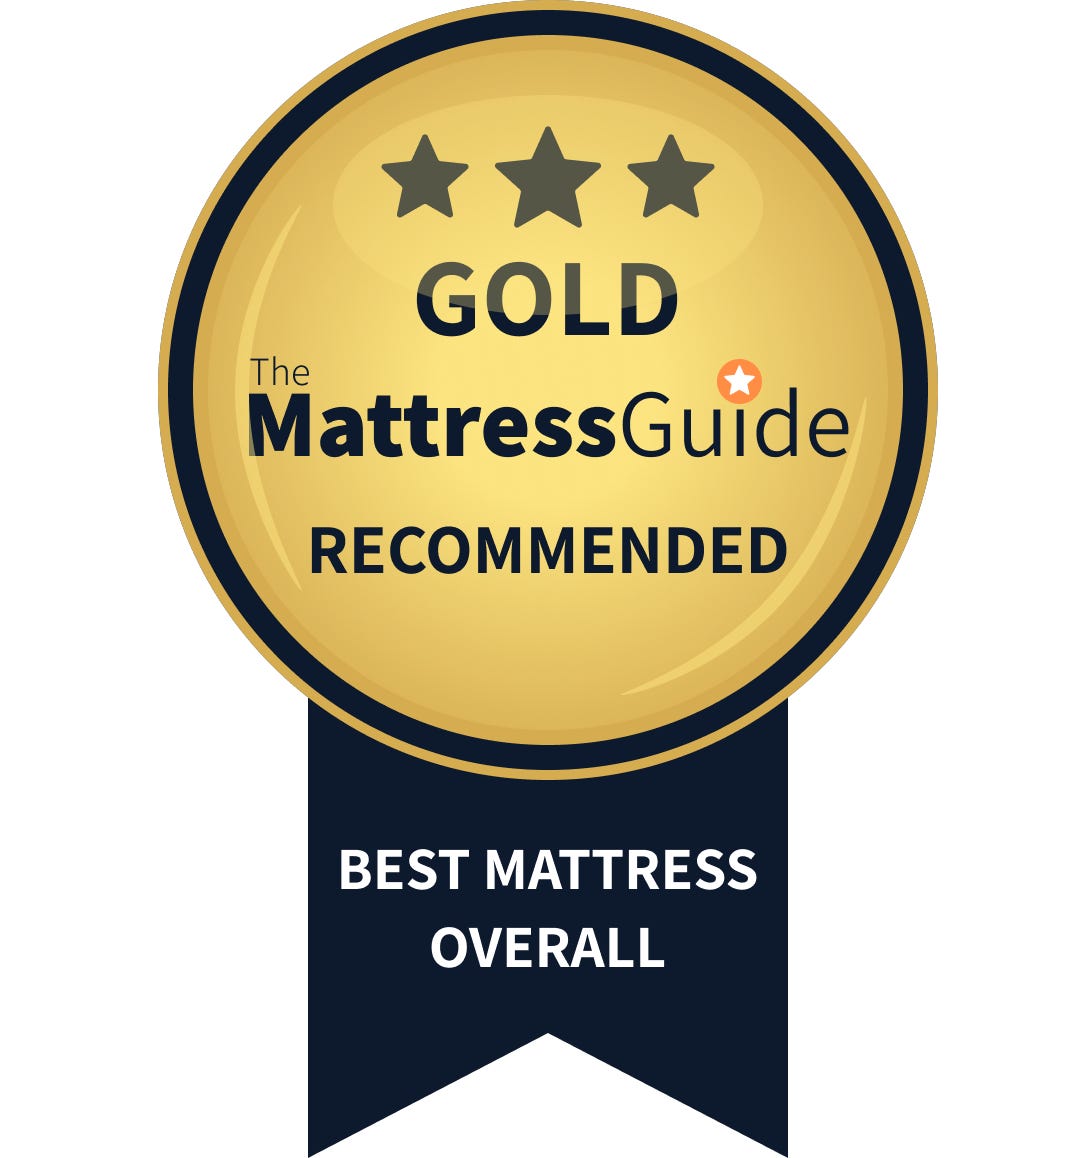 The Mattress Guide Recommended Emma Mattress Gold!